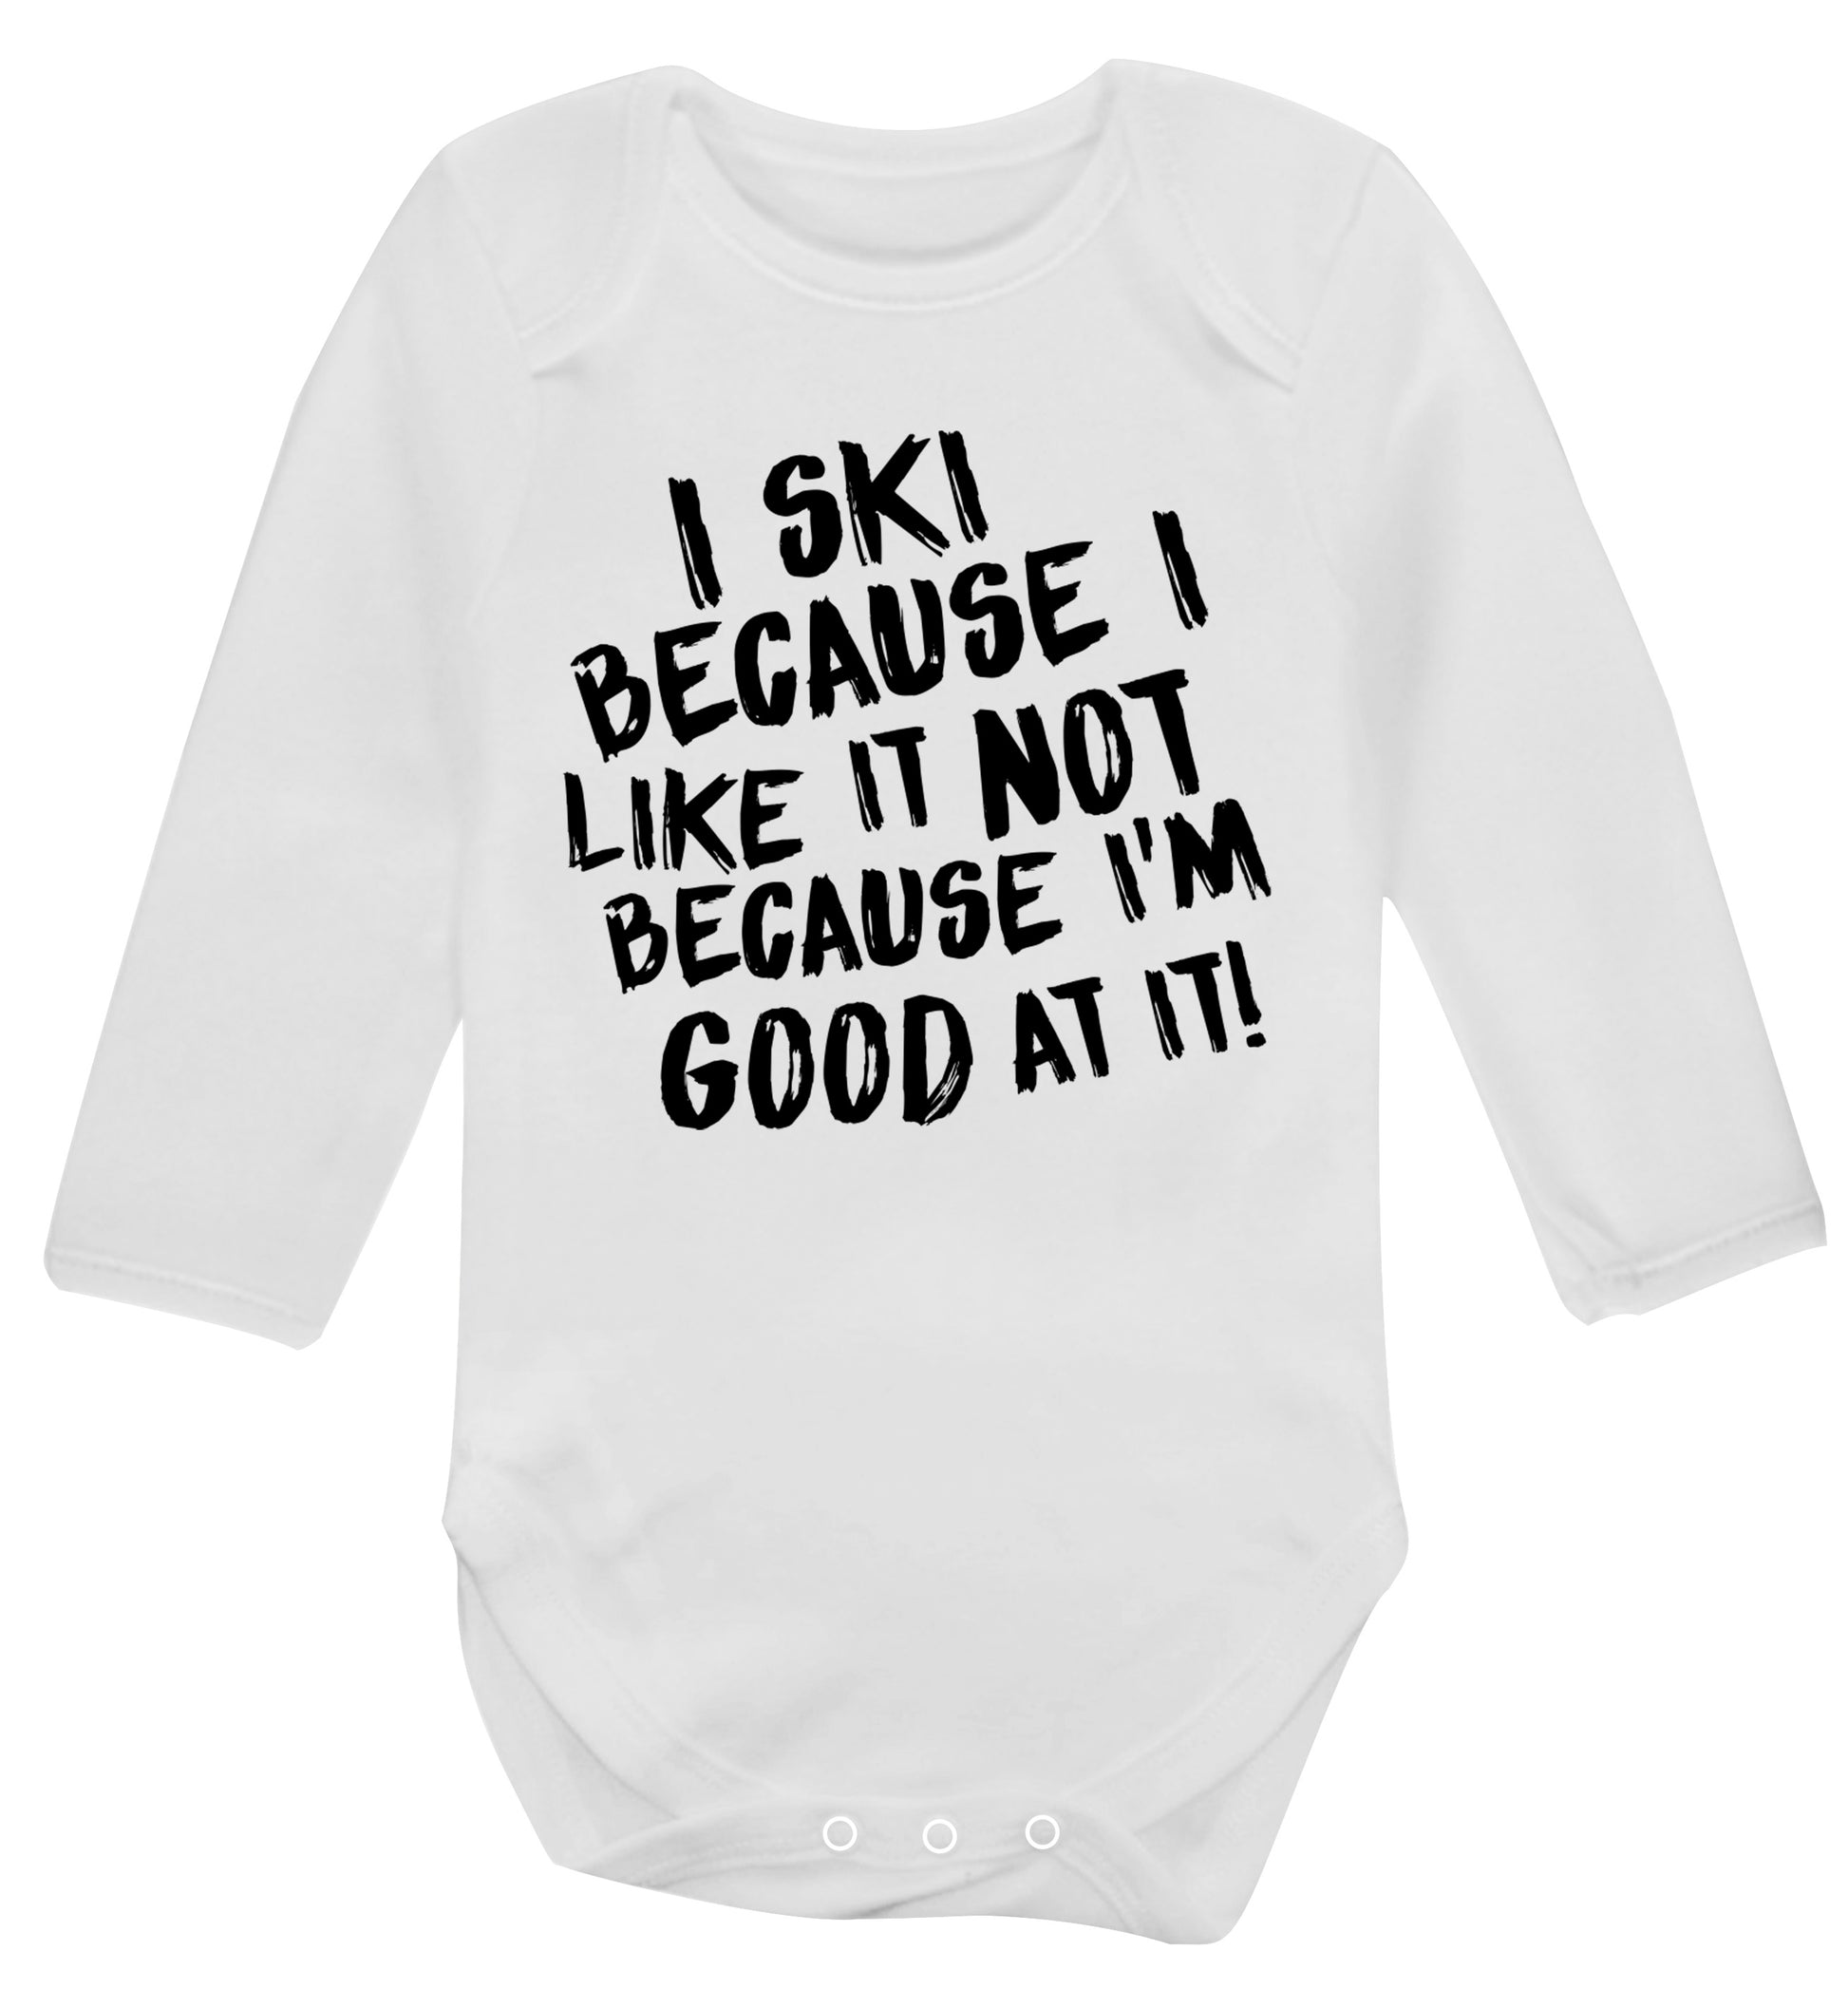 I ski because I like it not because I'm good at it Baby Vest long sleeved white 6-12 months